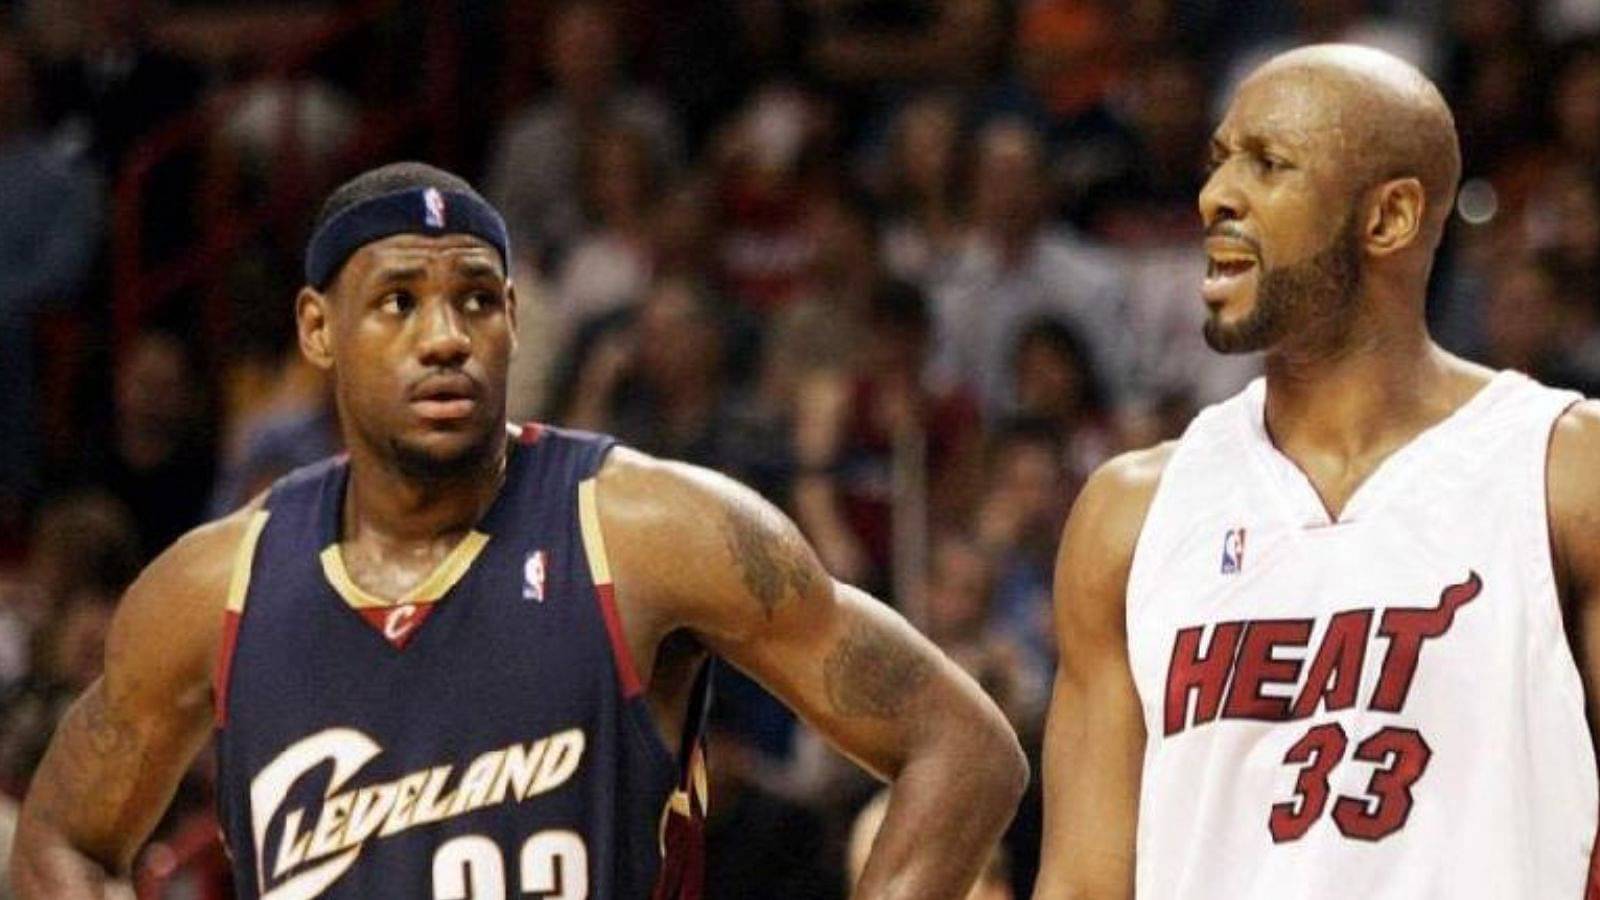 “Lebron James tries posterizing Alonzo Mourning then Dwyane Wade tries it on Bron”: When the young Heat and Cavaliers stars tried taking revenge for their teammates and failed